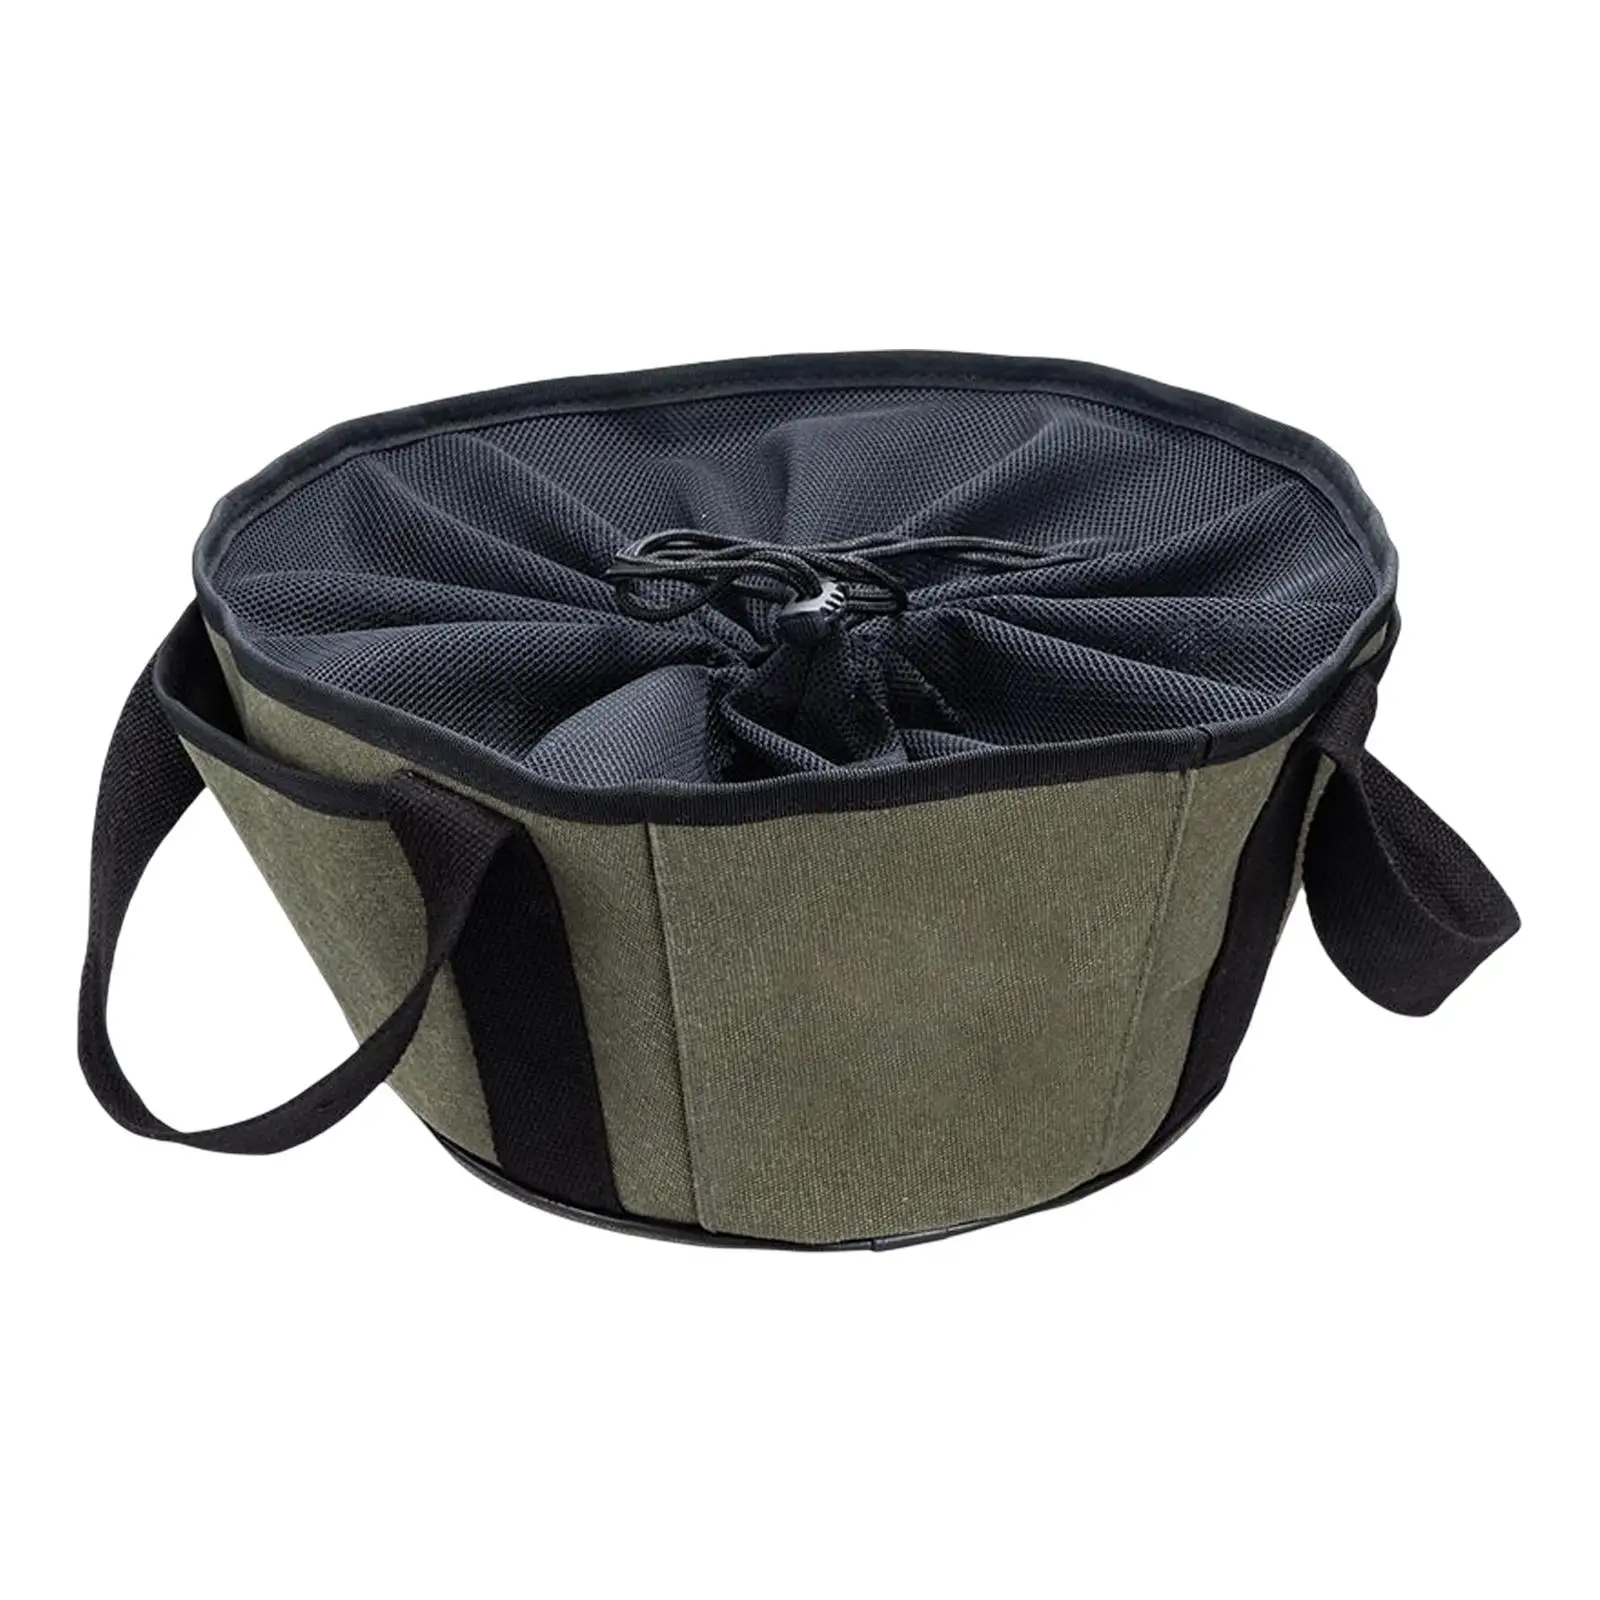 Storage Bag Portable Durable Accs Barbecue Storage Pouch for Hiking Outdoor